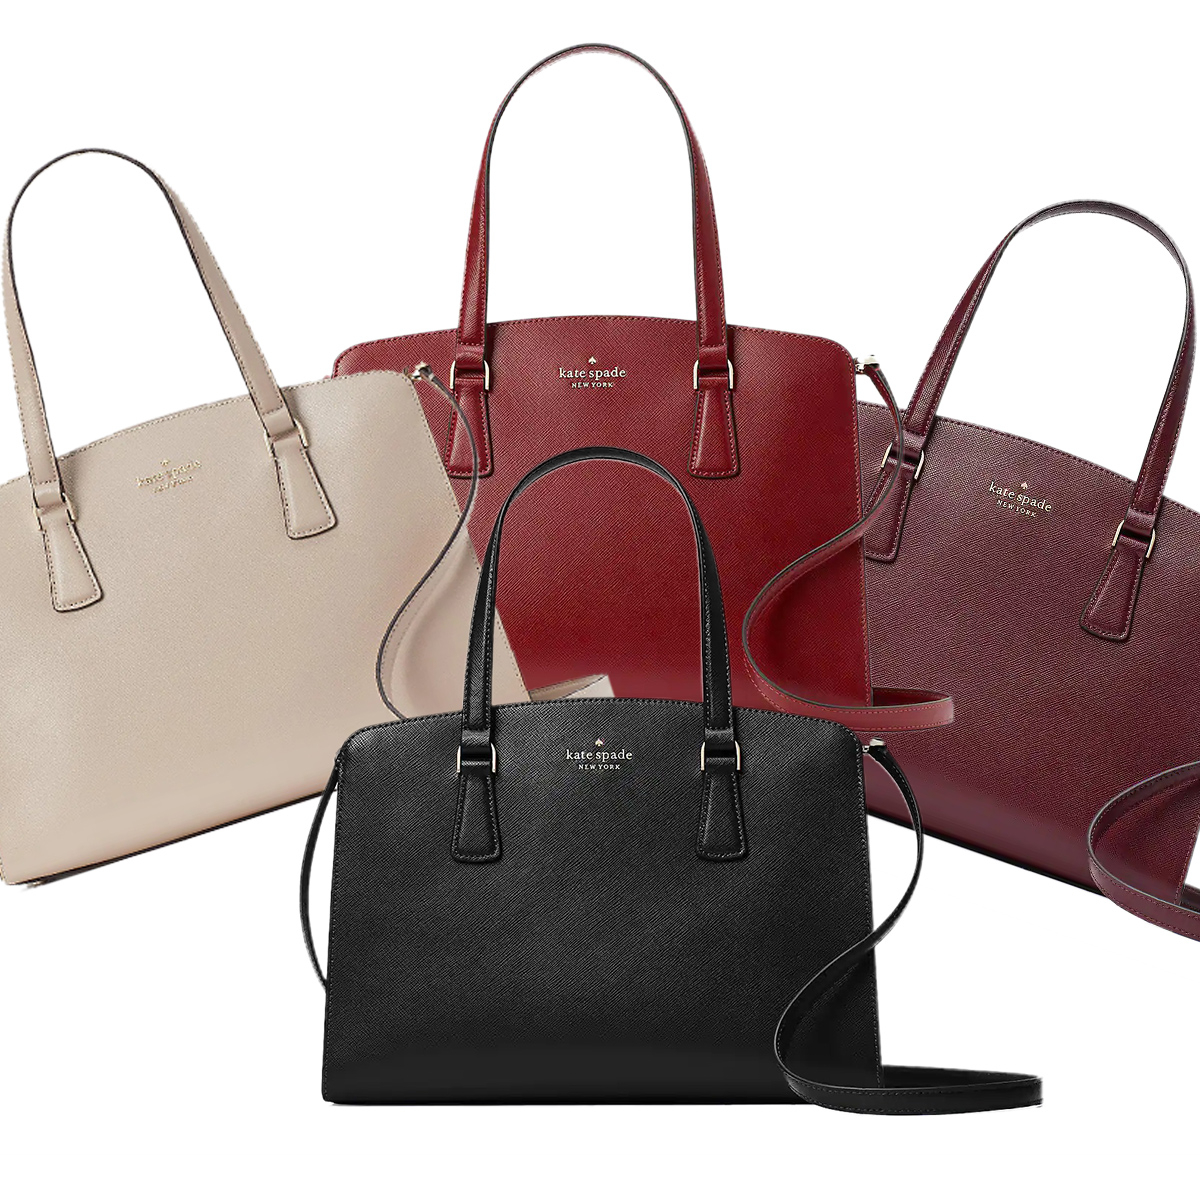 Kate Spade Flash Deal: Save $291 on a Satchel That Comes in 4 Colors